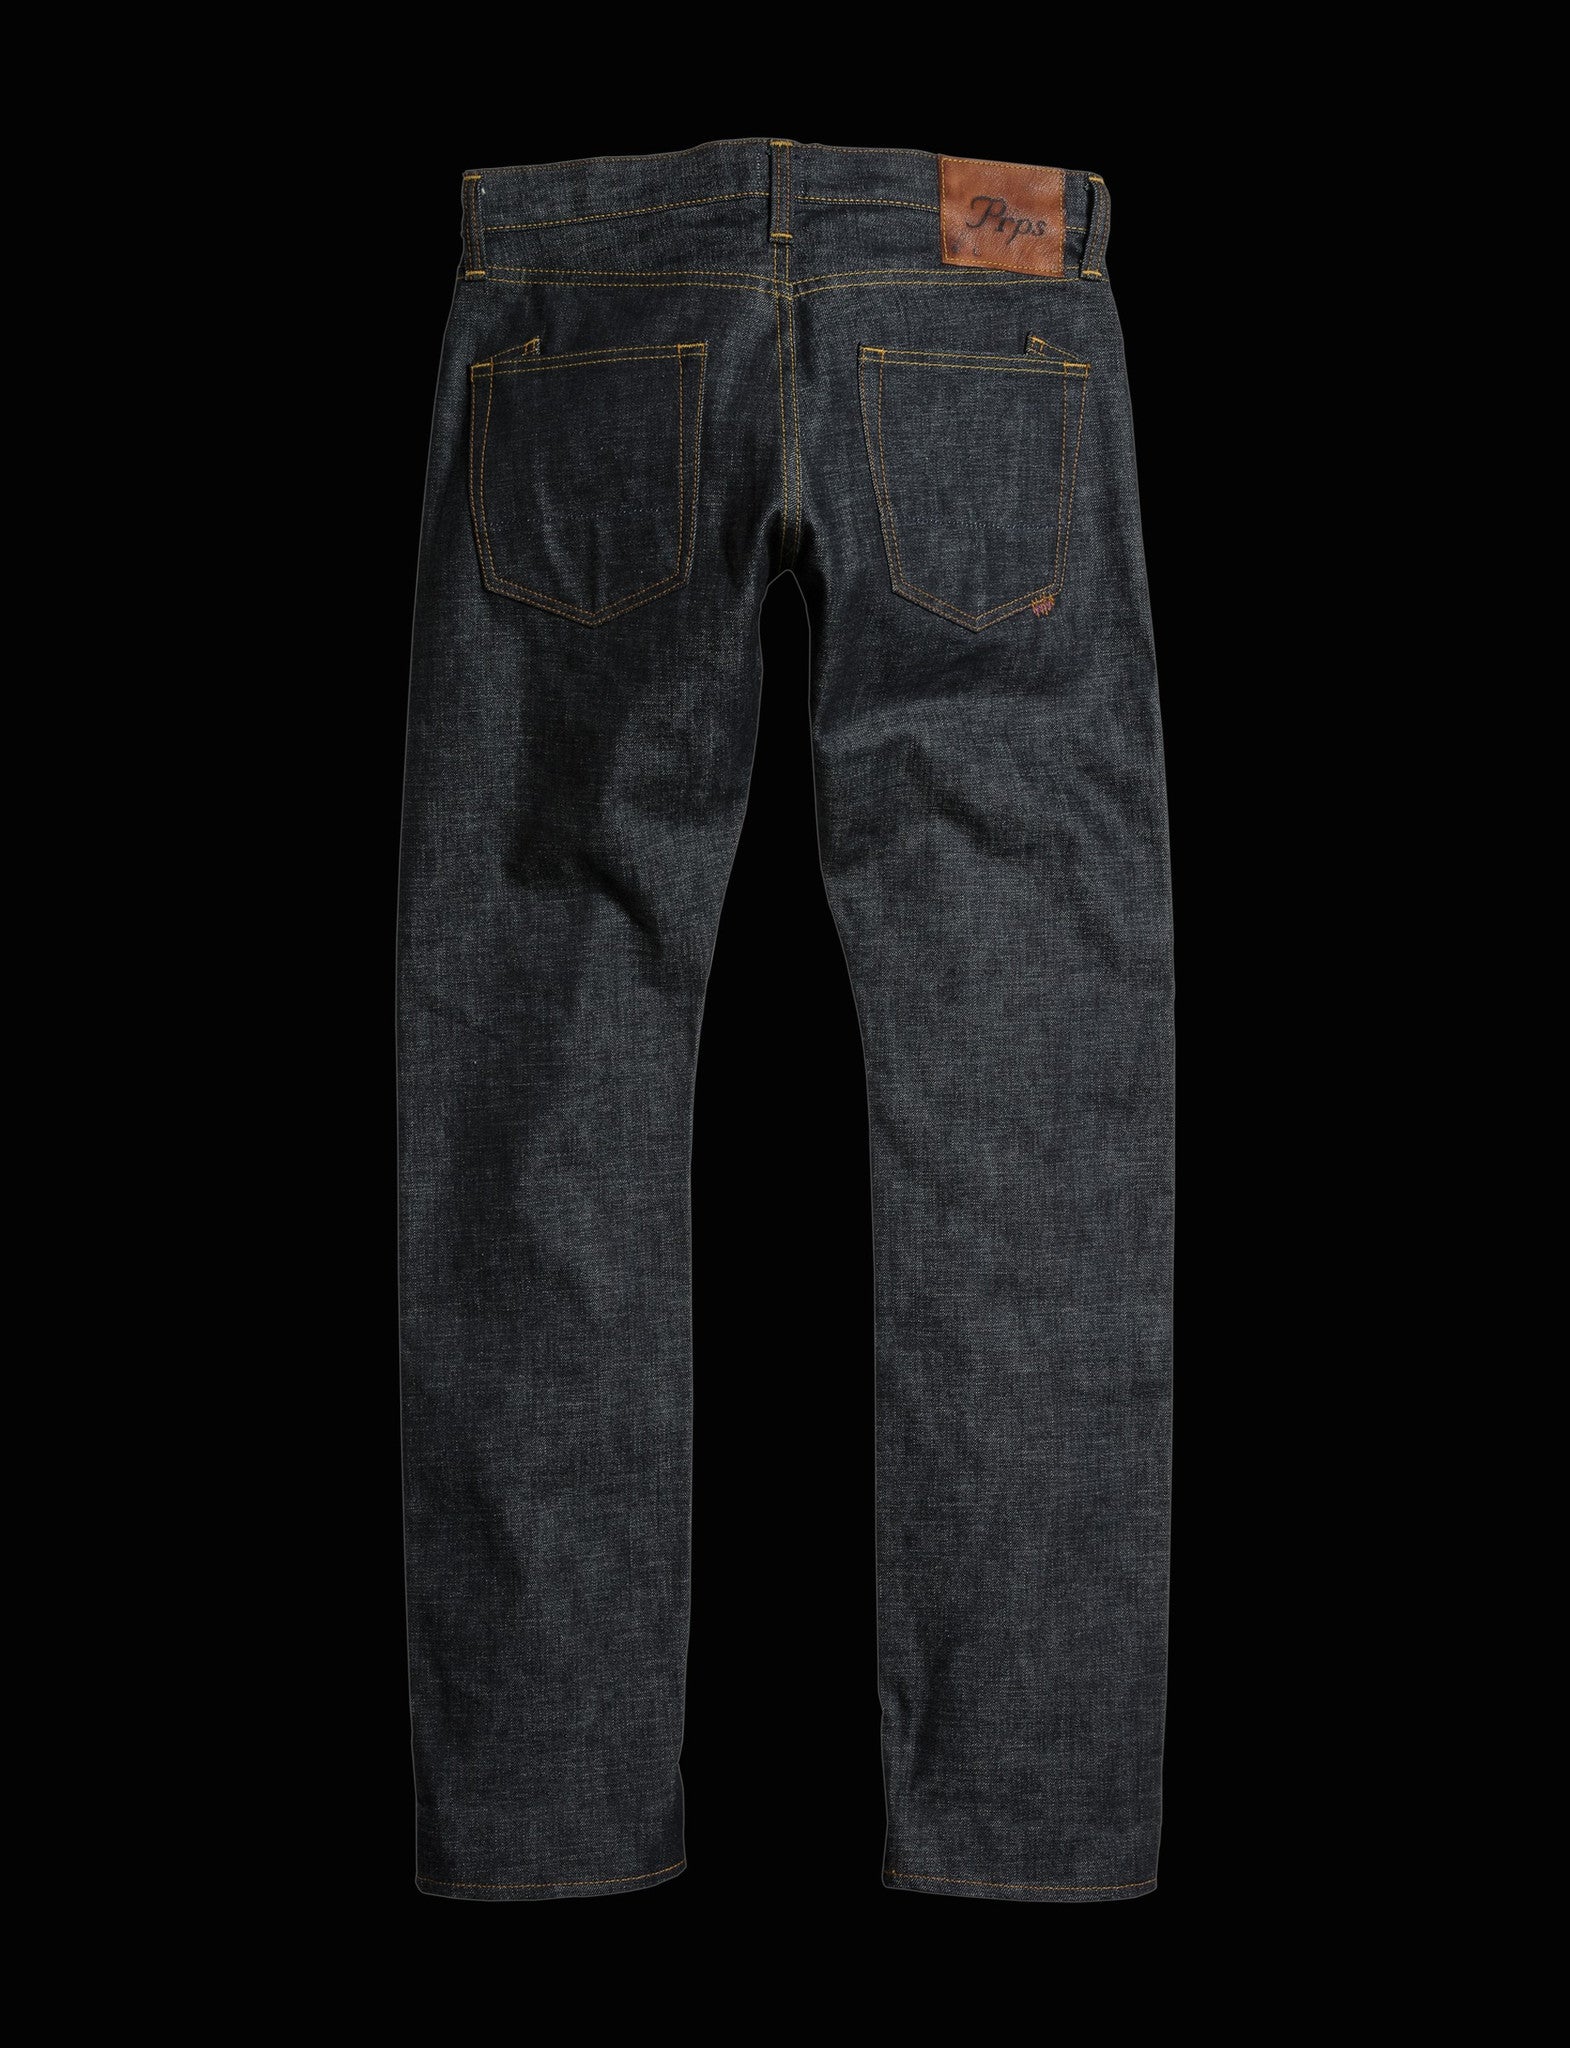 prps jeans price